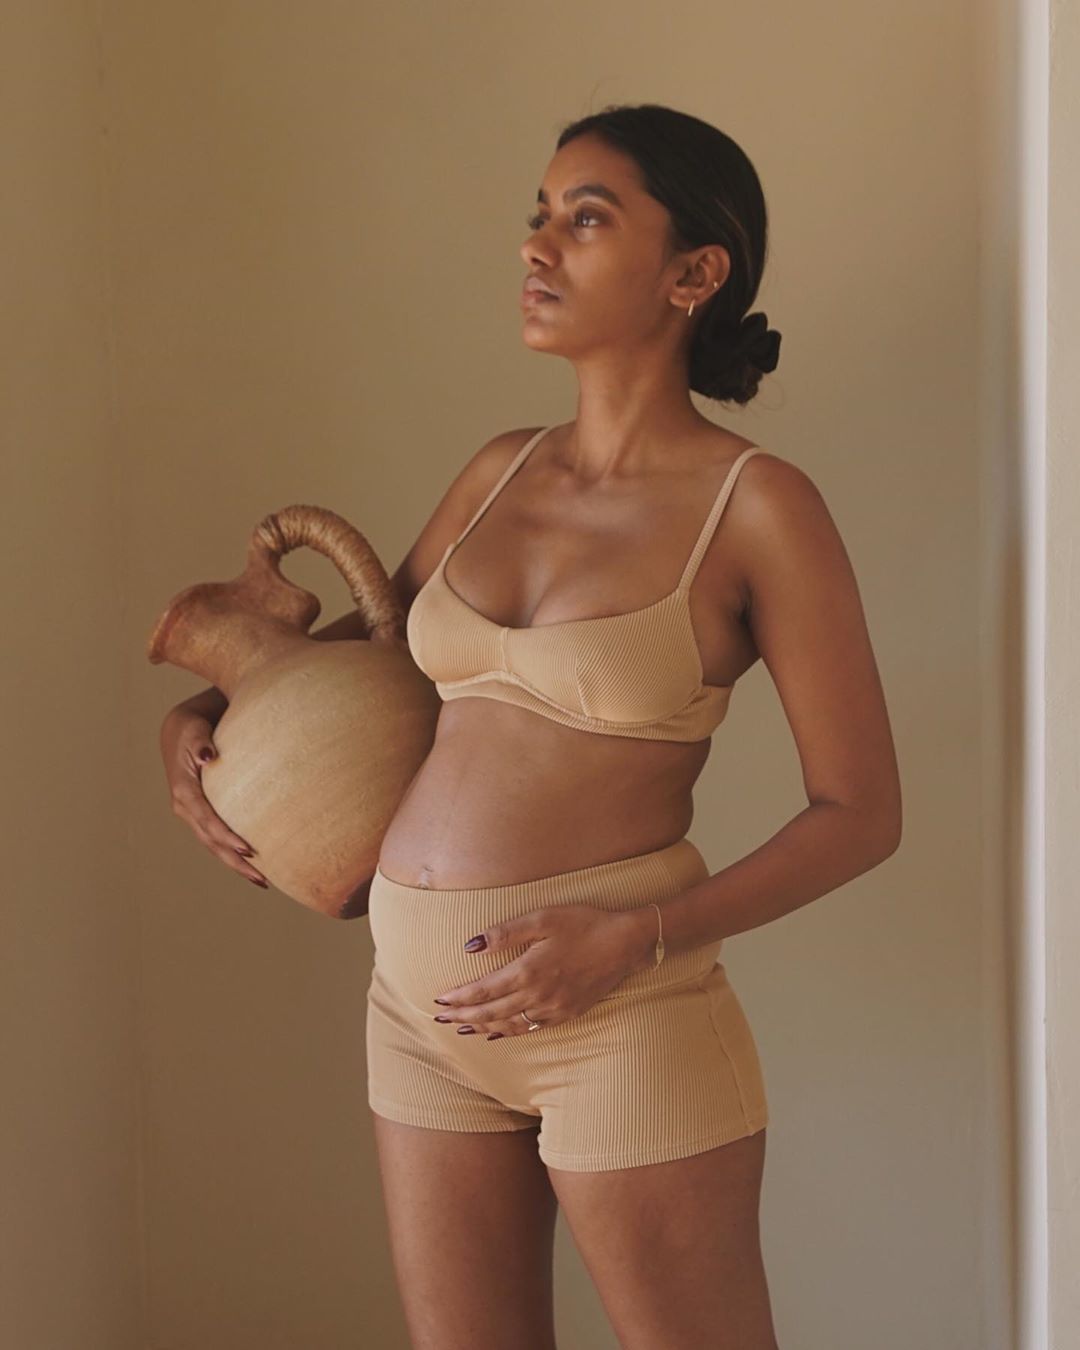 Maternity lingerie see through The 18 Best Maternity And Nursing Bras Hands Down Who What Wear